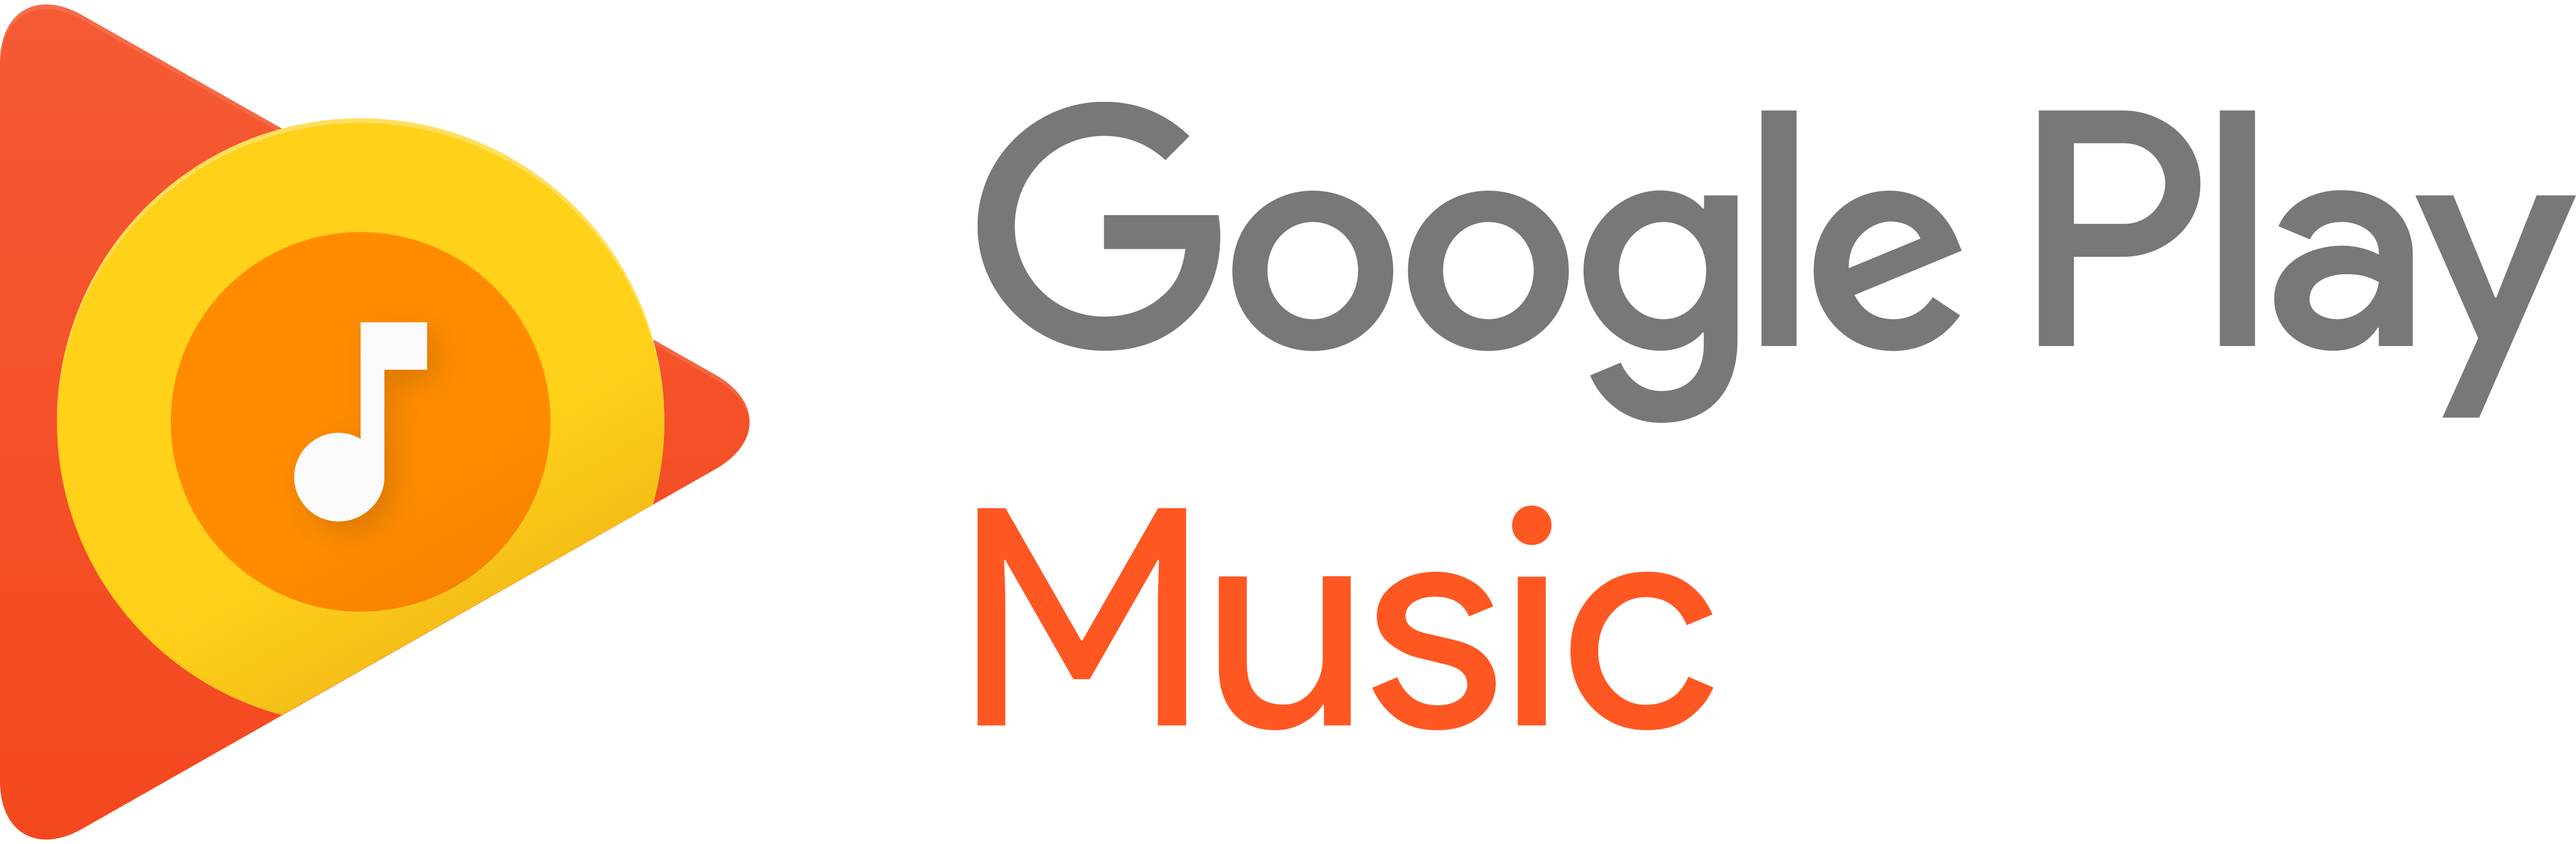 Google play music png. Review me 